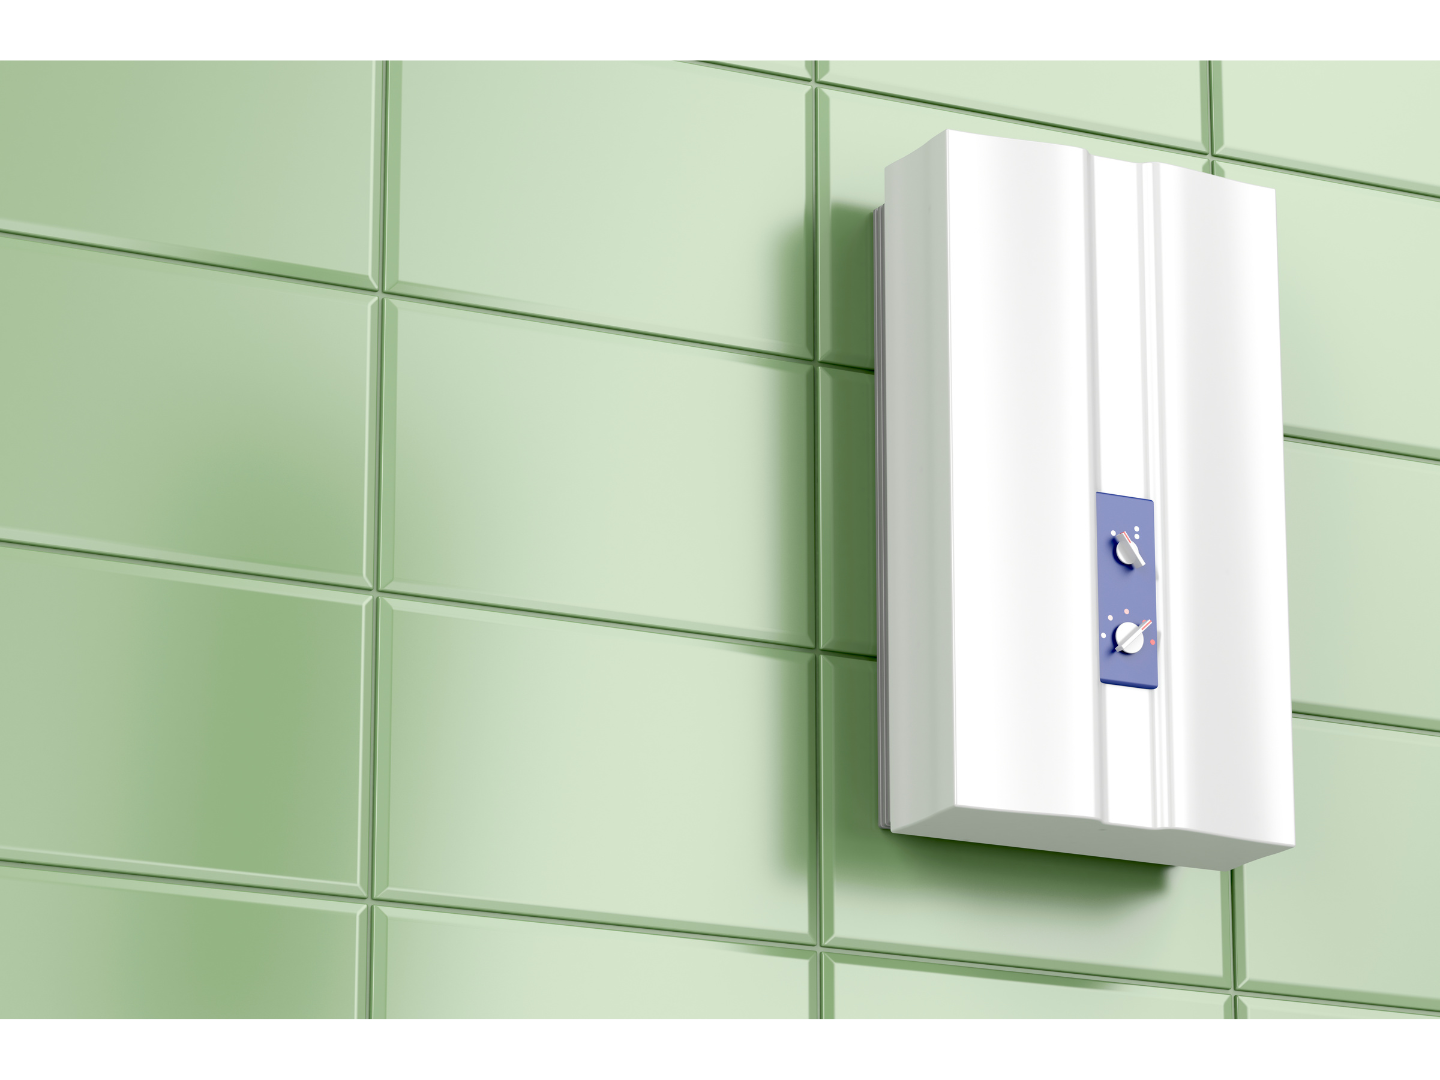 A white water heater is hanging on a green tiled wall.